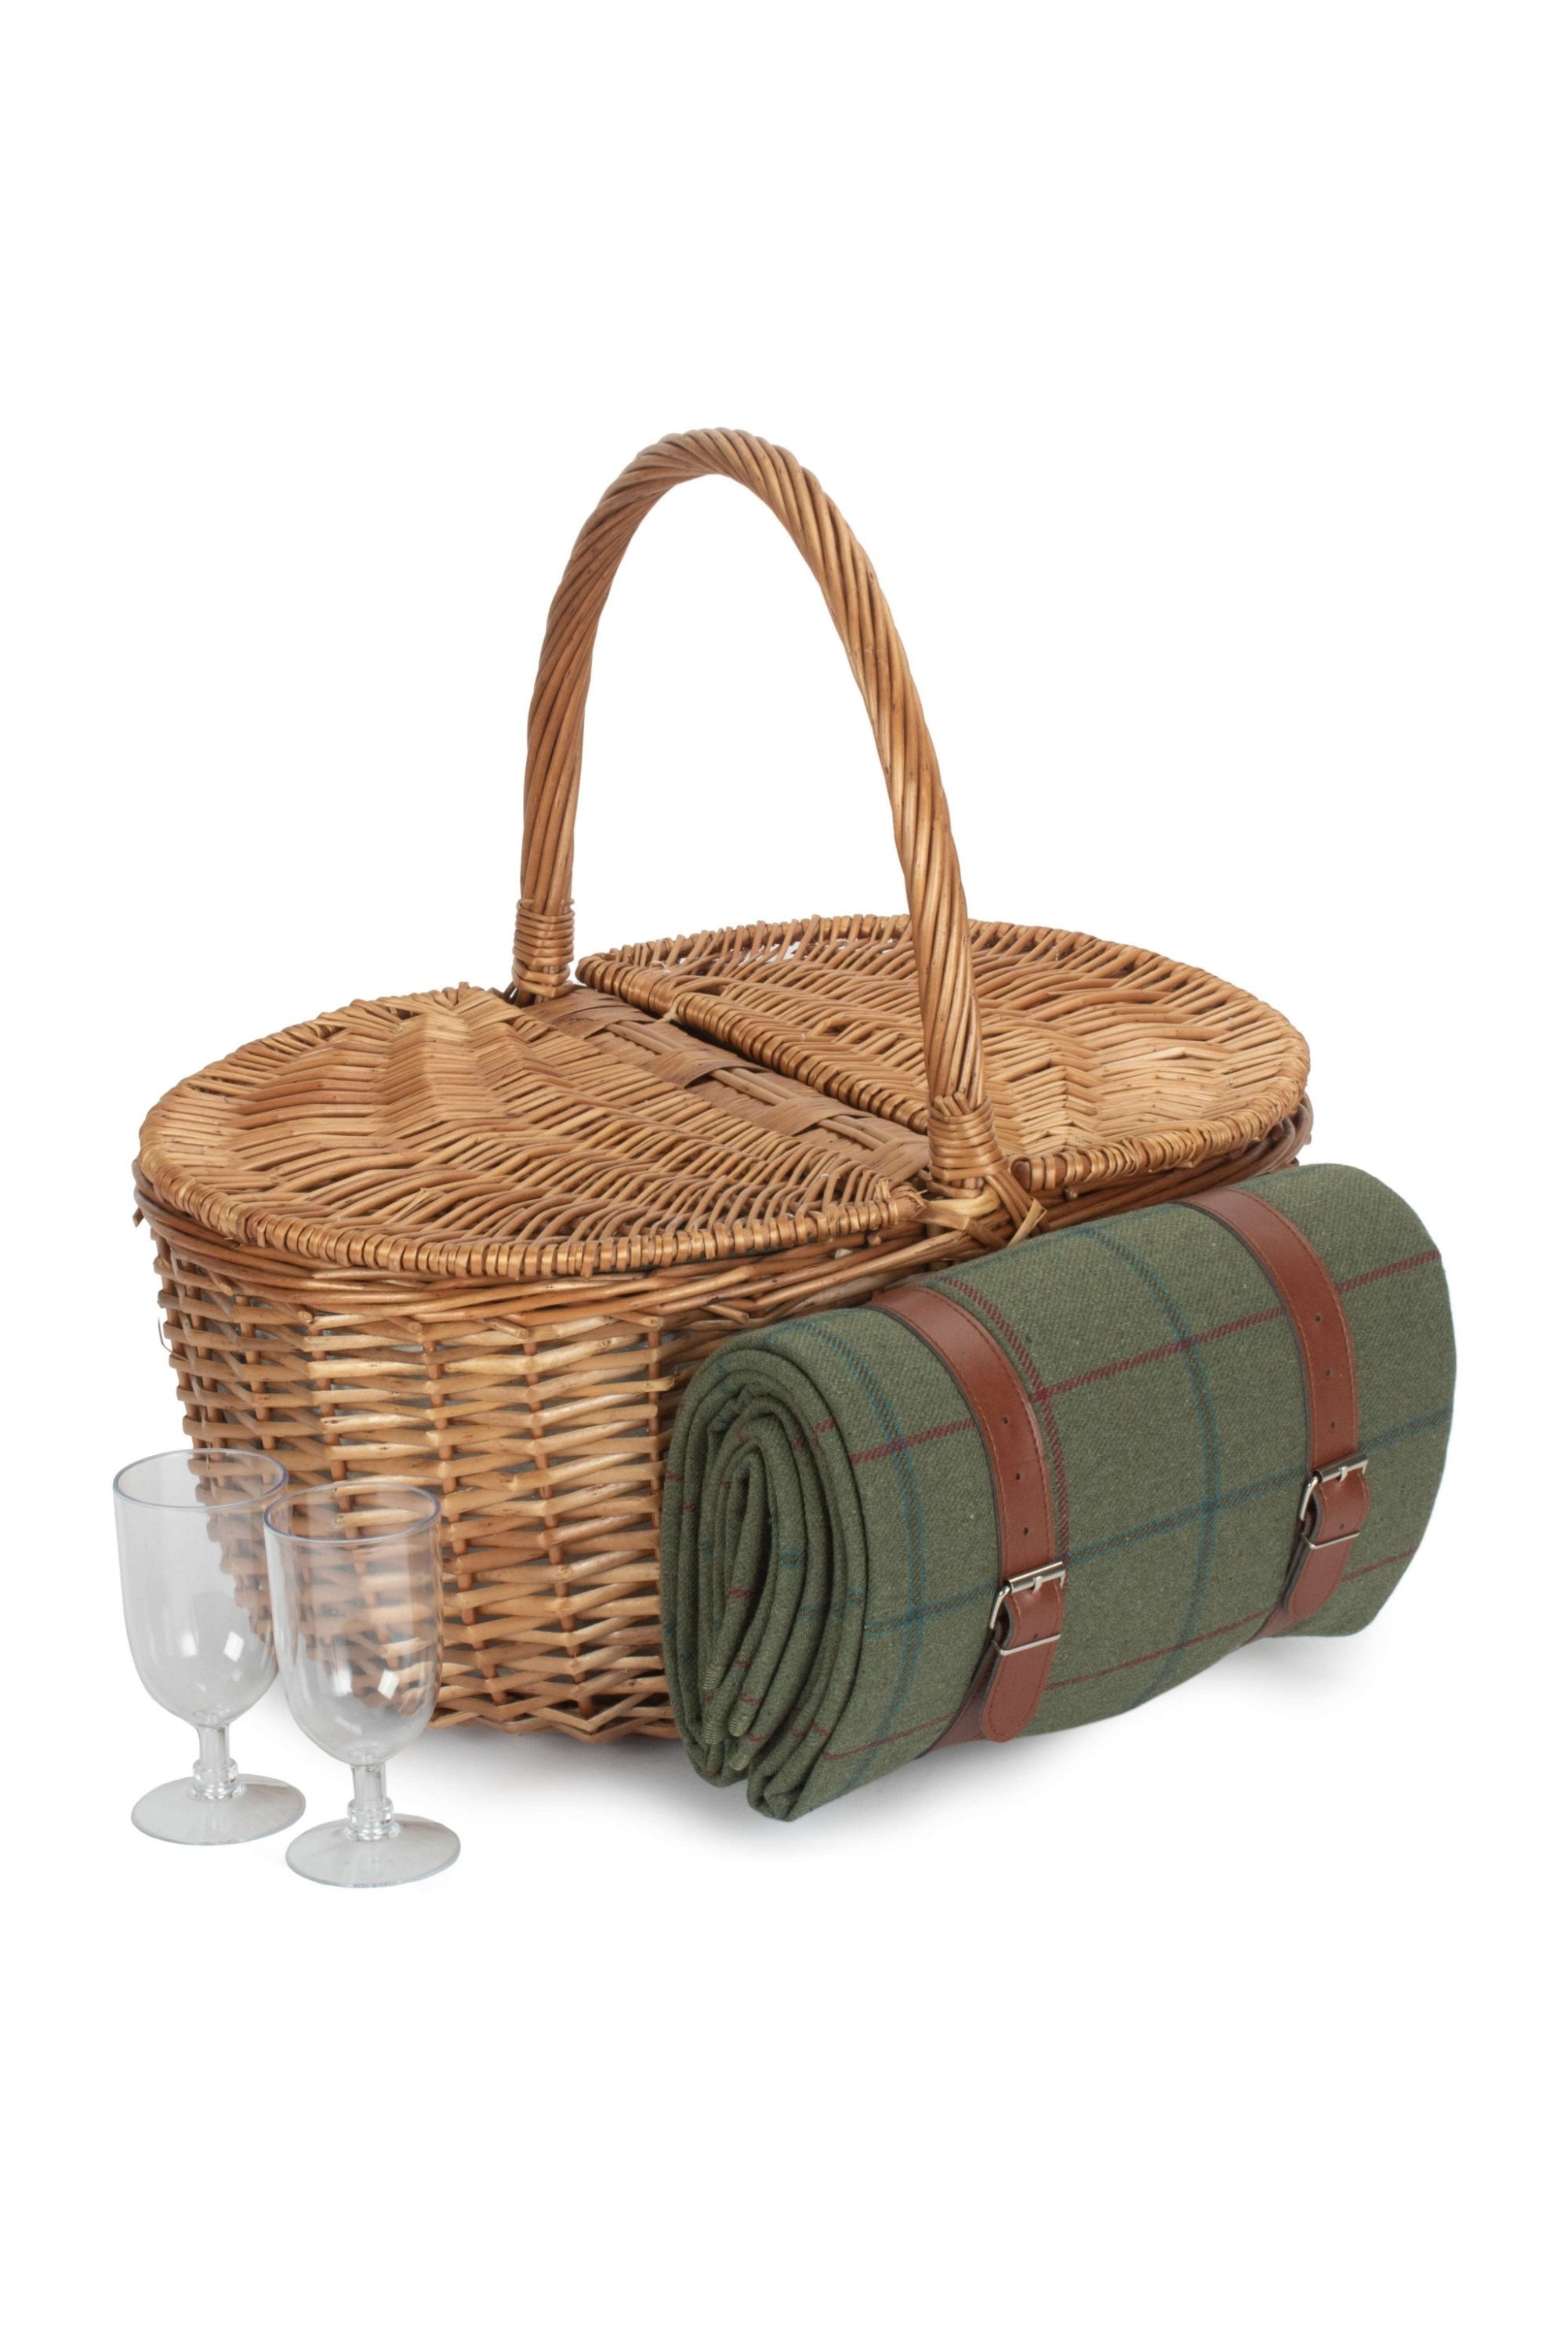 Oval Double Steamed 2 Person Fitted Picnic Basket -